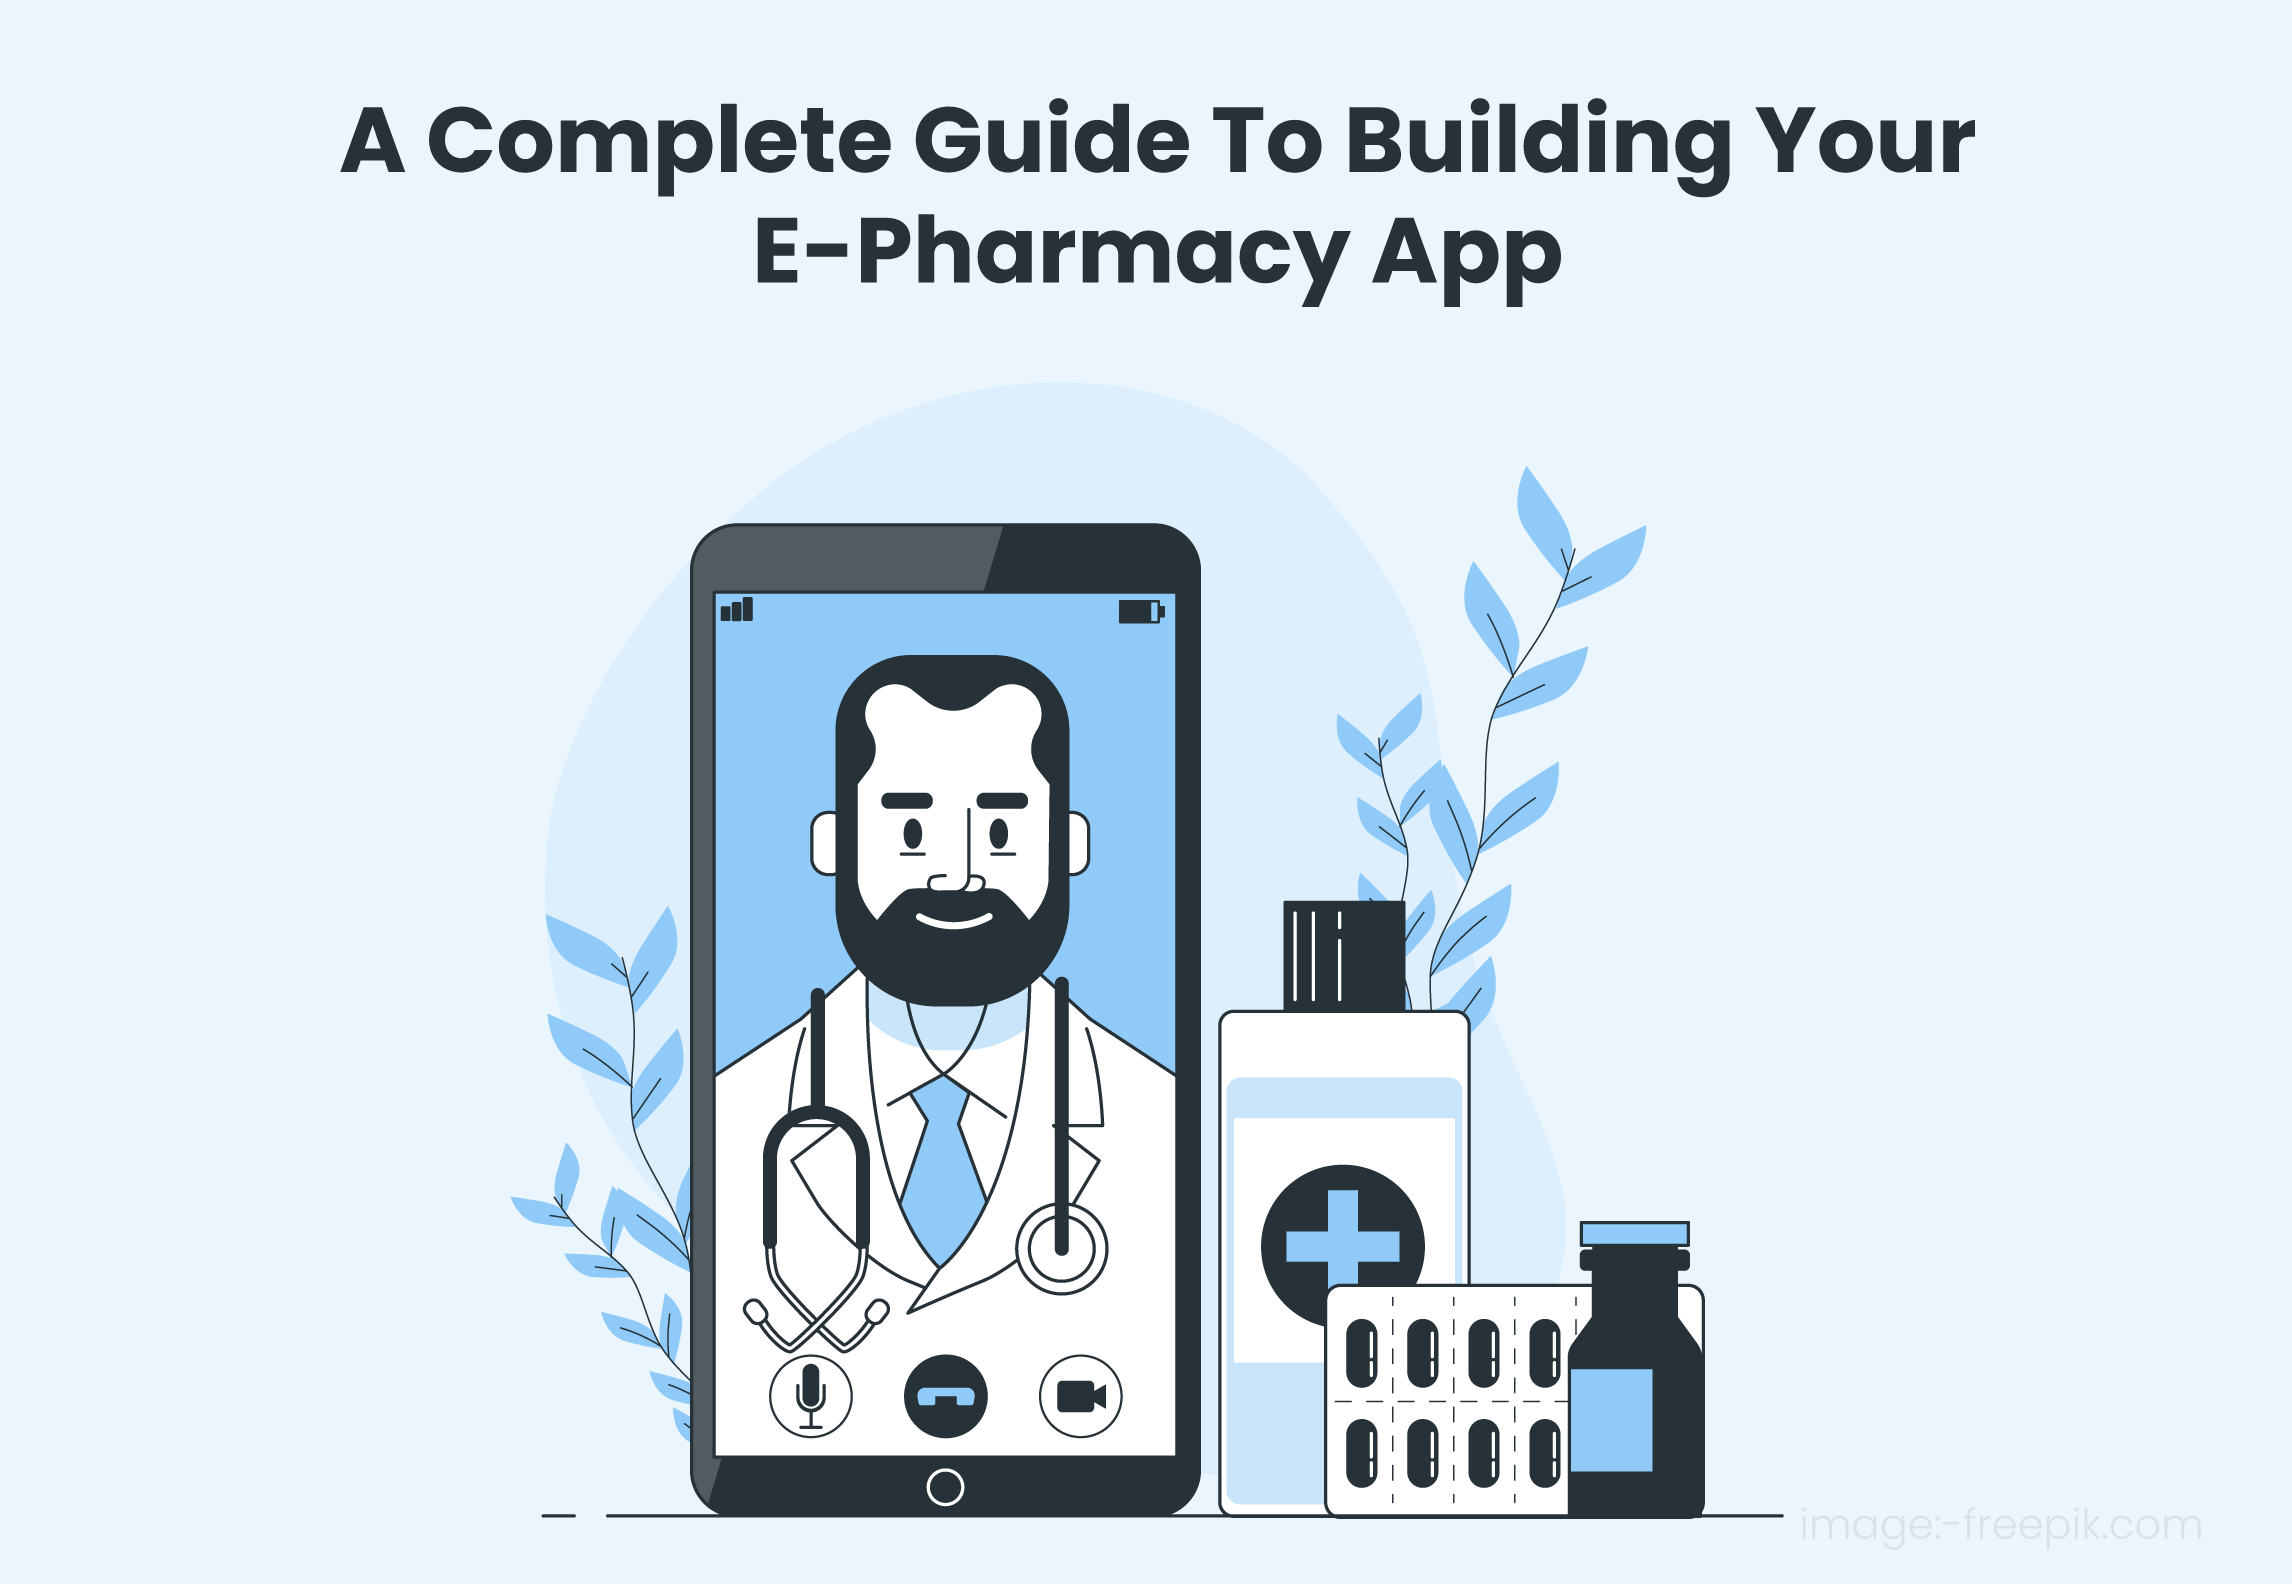 A Complete Guide To Building Your E-Pharmacy App